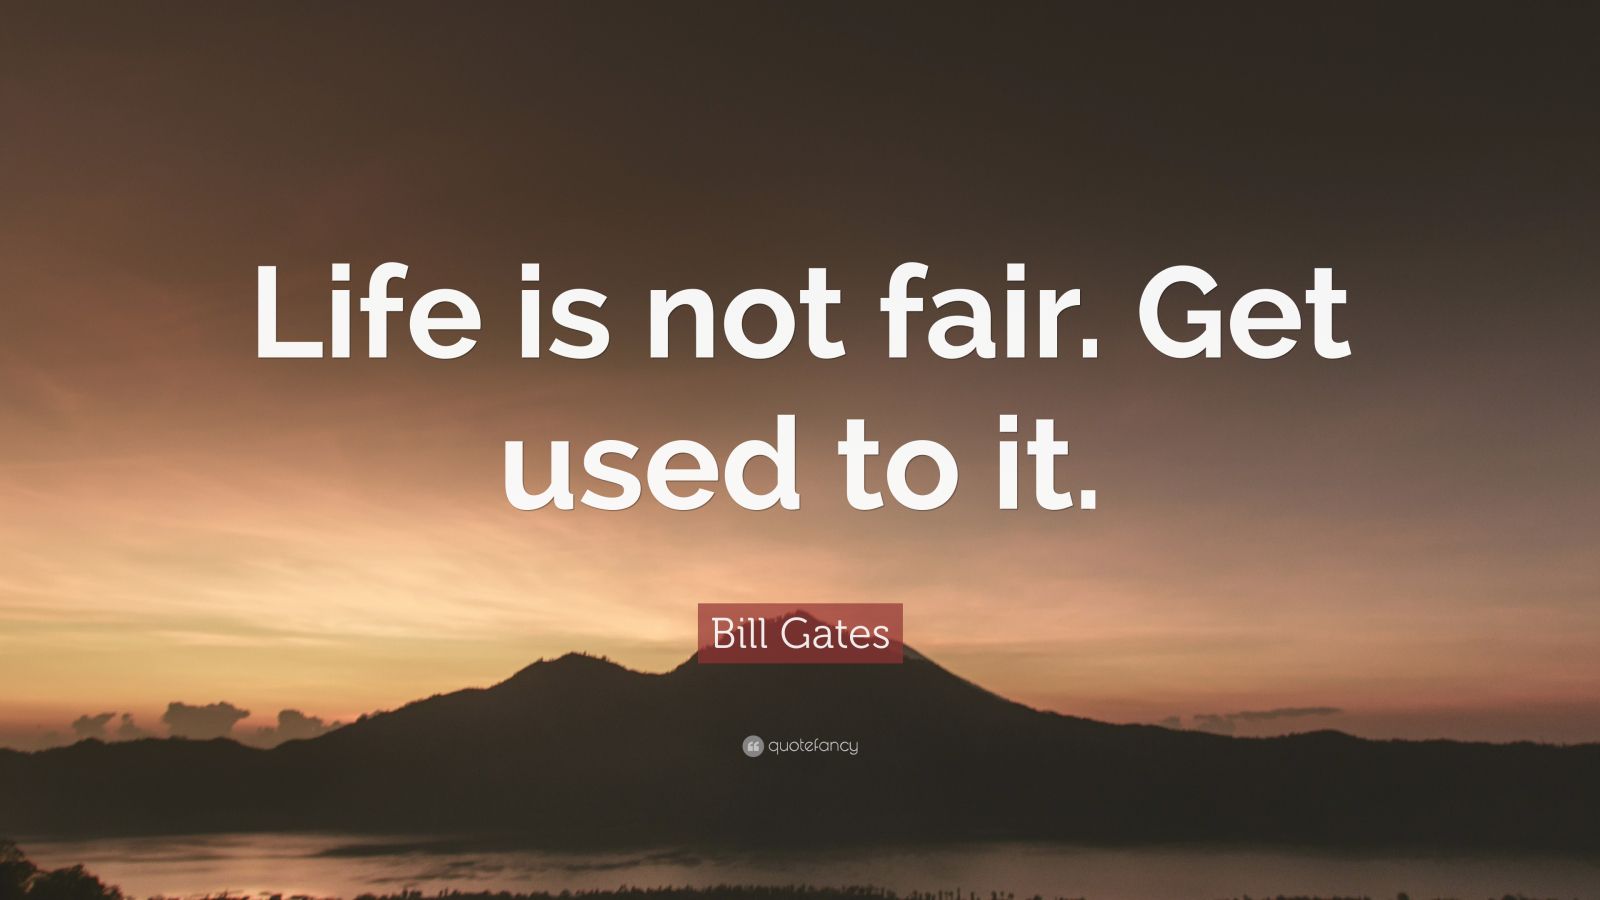 Bill Gates Quote “Life is not fair. Get used to it.” (19 wallpapers